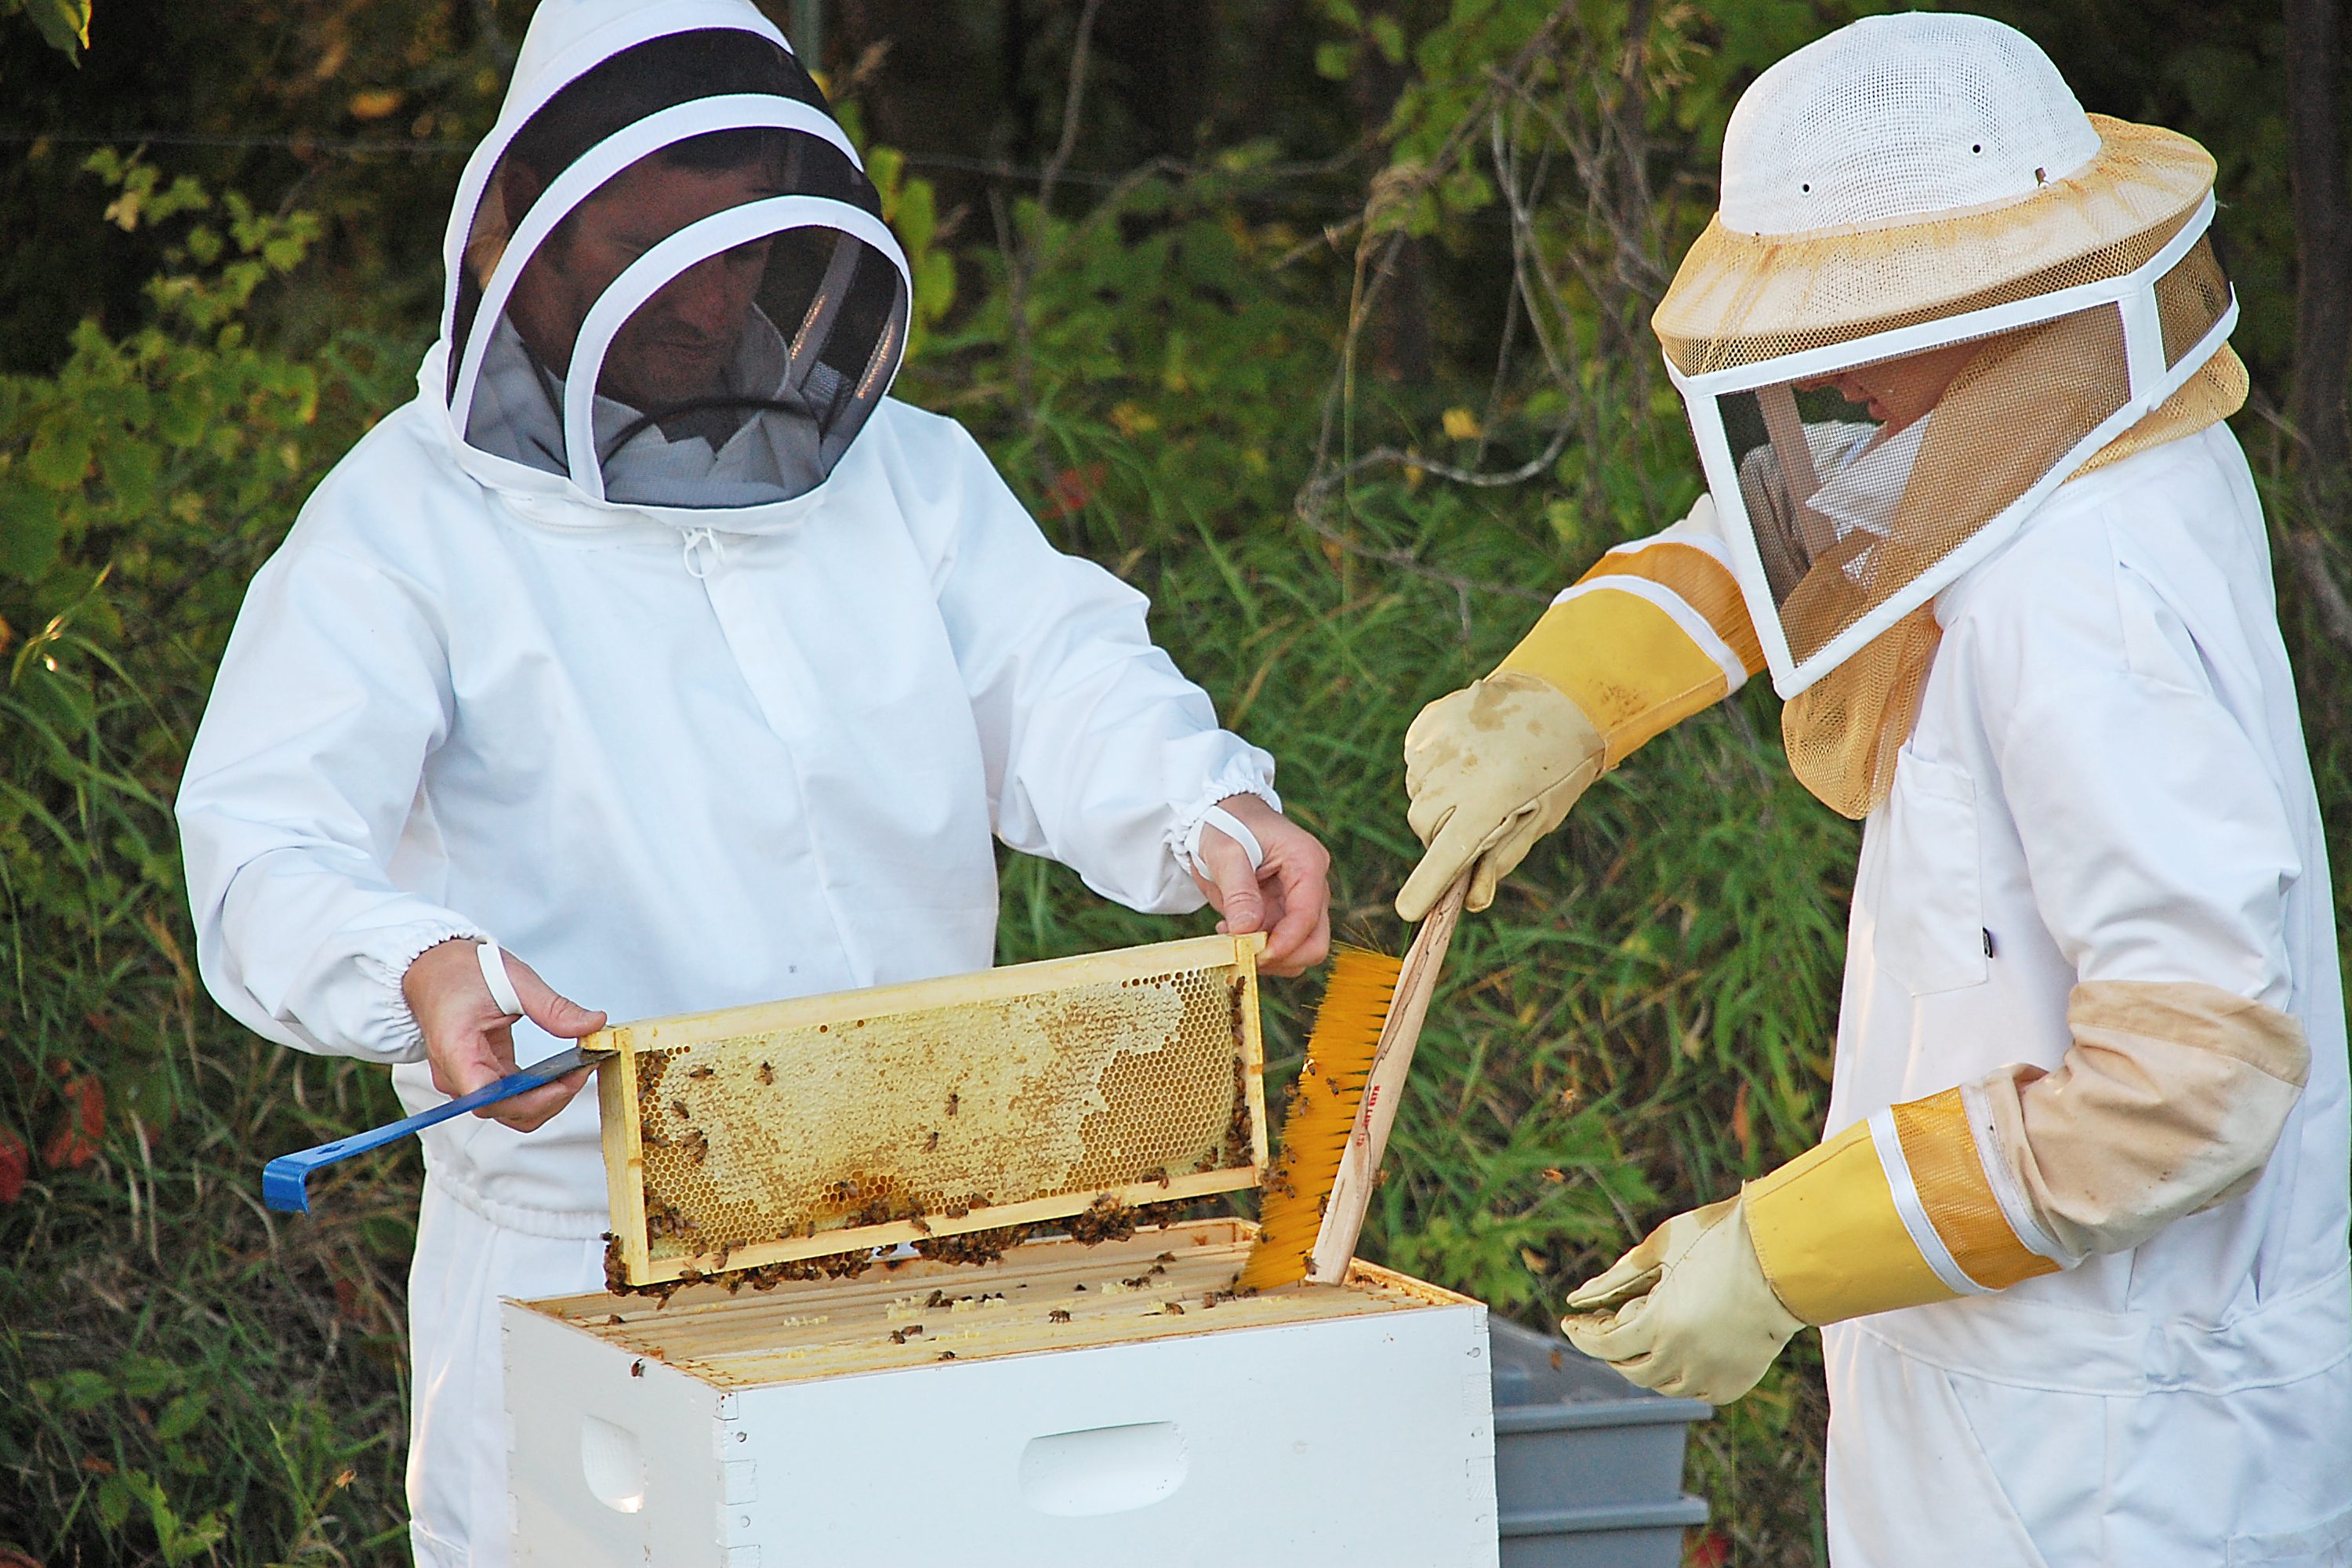 Do You Know Anyone Who Harvests Honey?